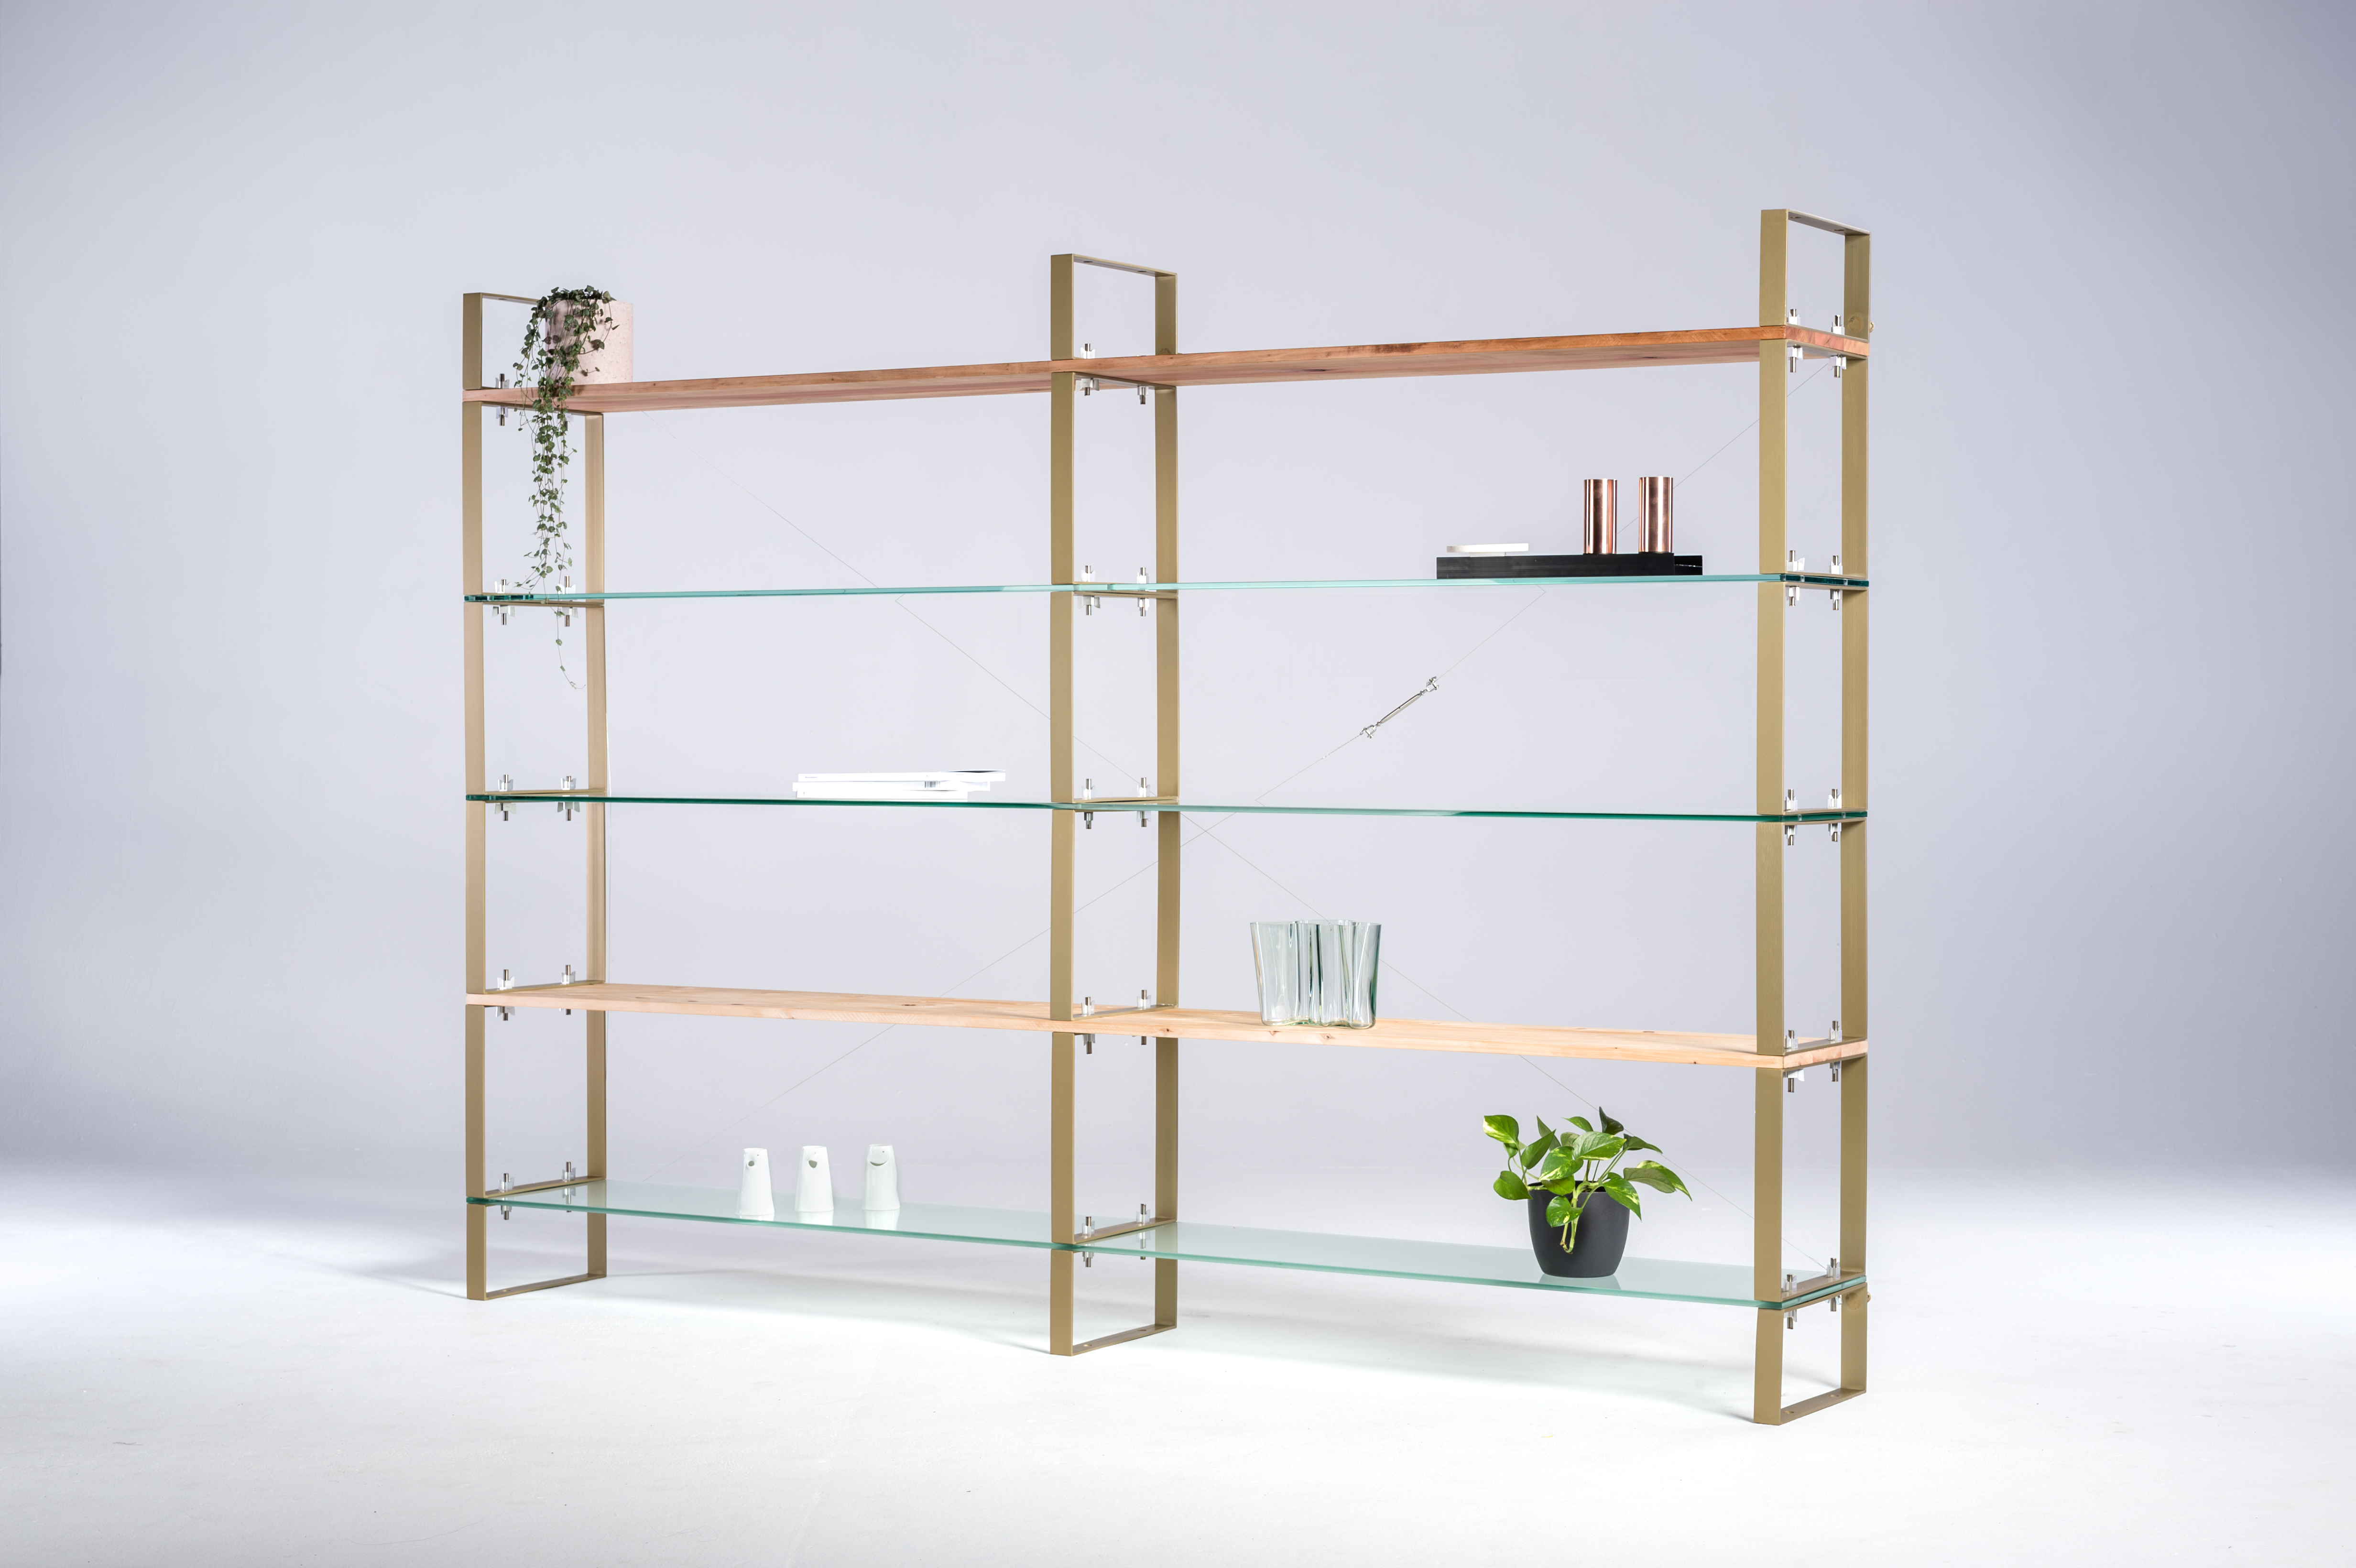 The shelves can be built in different sizes and with different finishes.